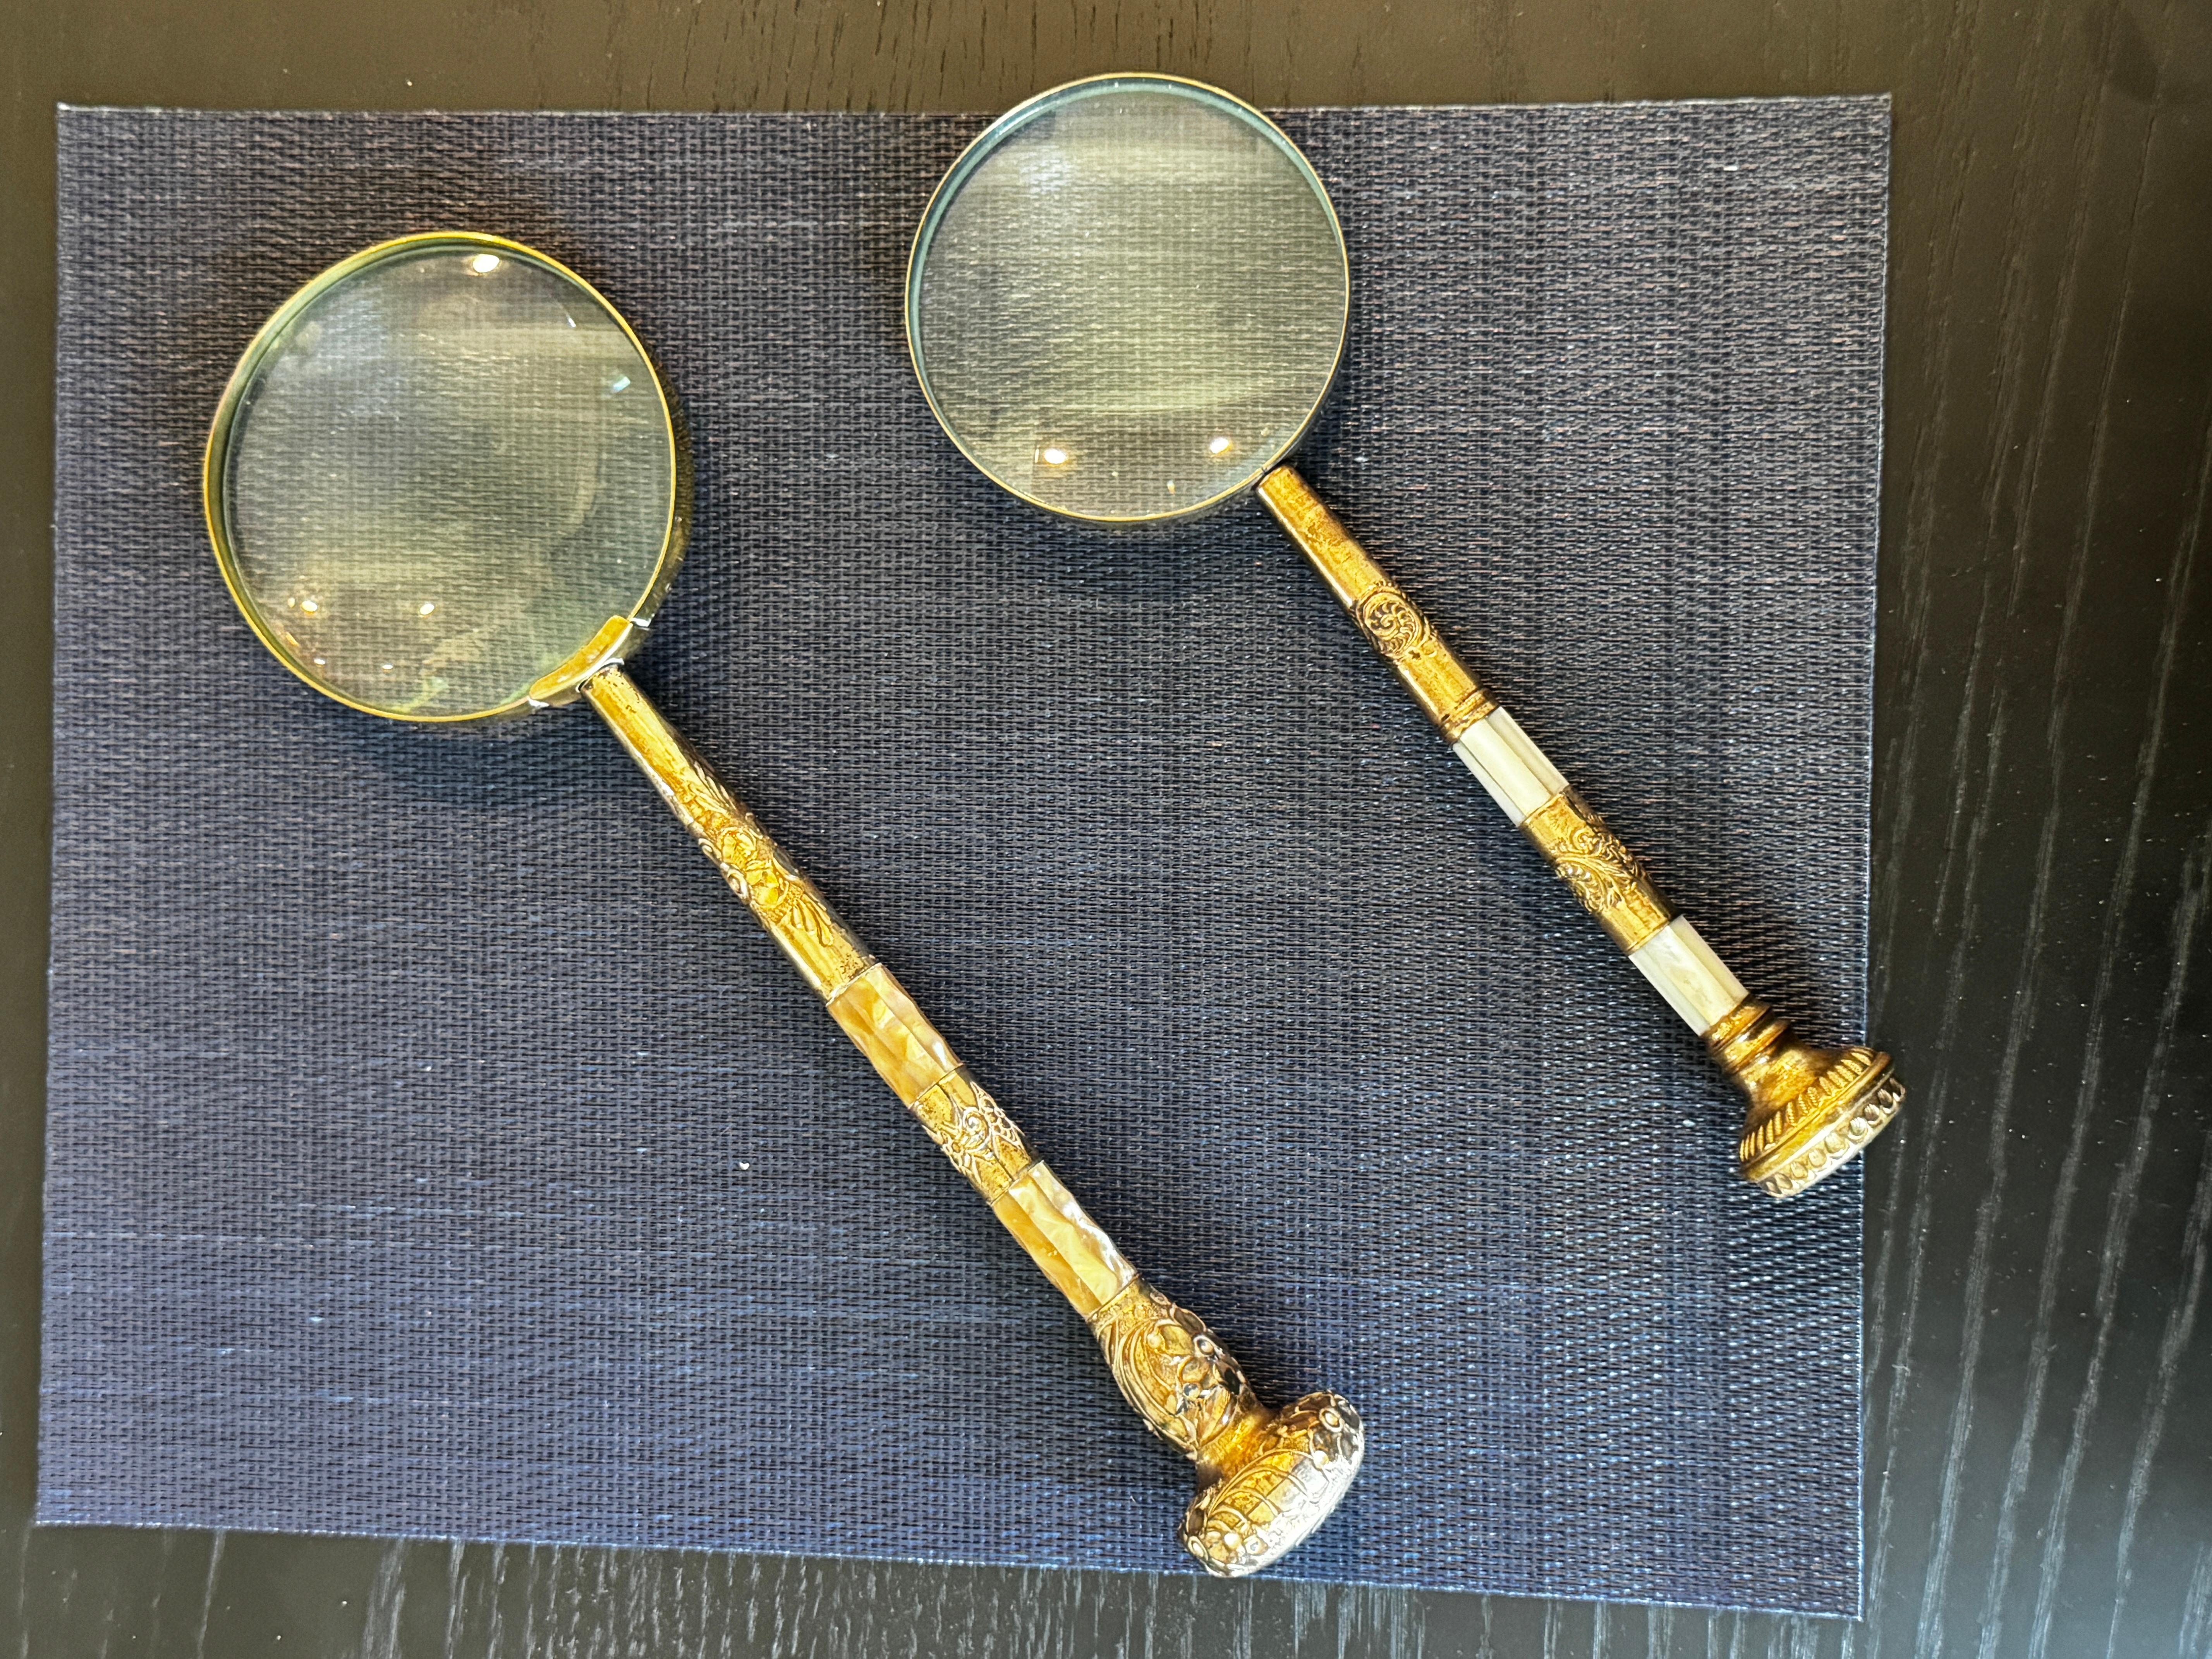 Two Large Magnifiers With 19th Century Gilded and Mother-of-Pearl Handles For Sale 1